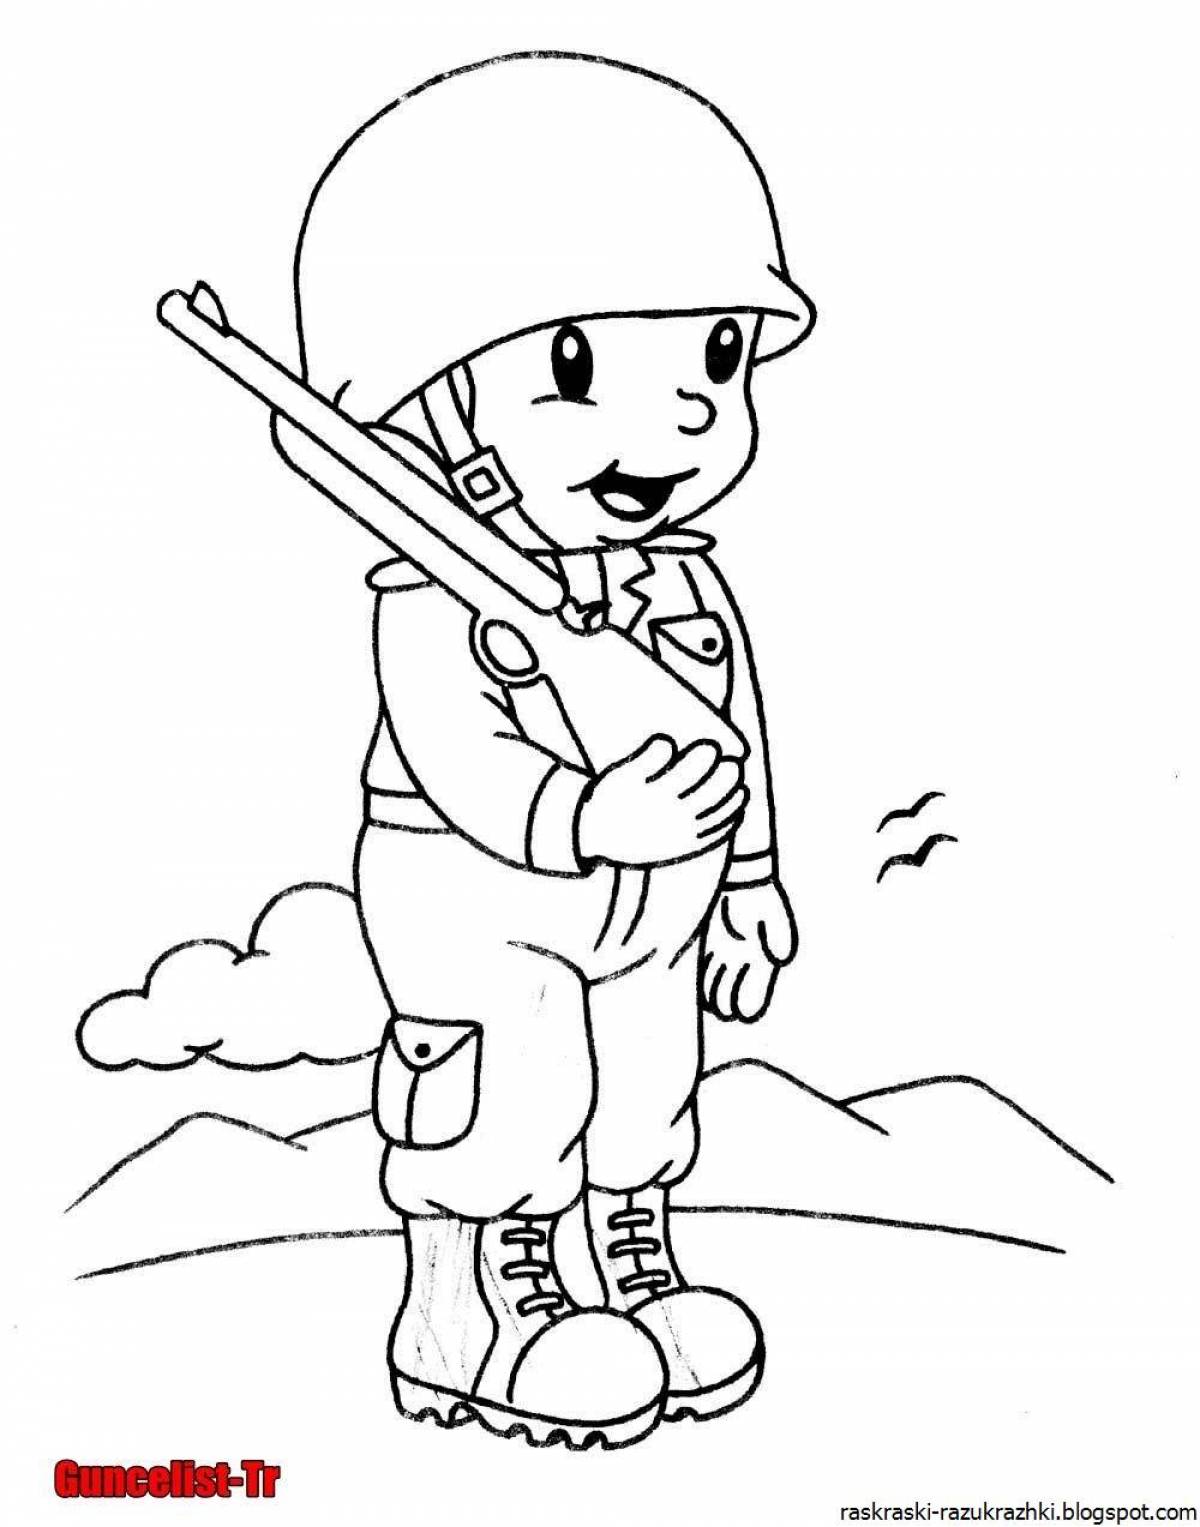 Bold war coloring book for kids